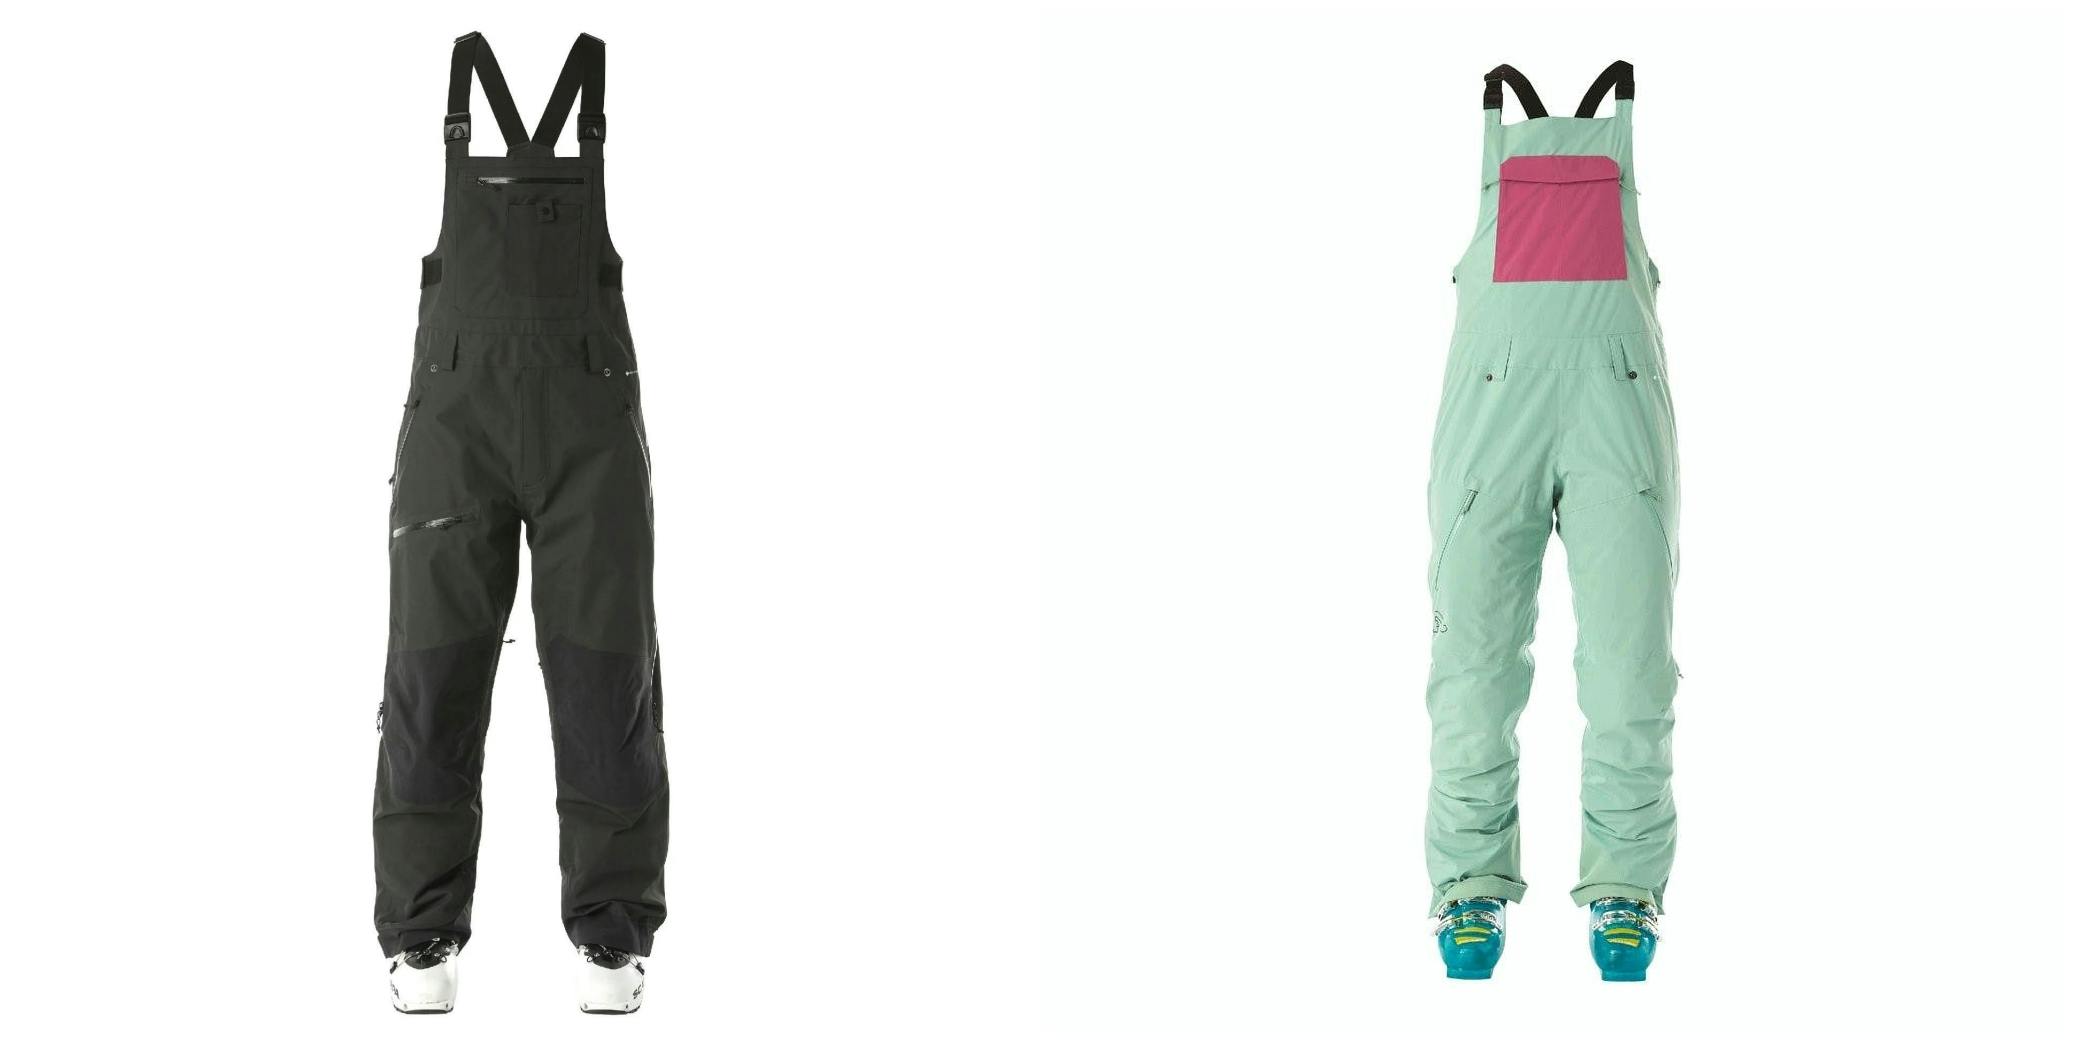 Two bib-style pairs of ski pants. One is black while the other is teal with a pink detail